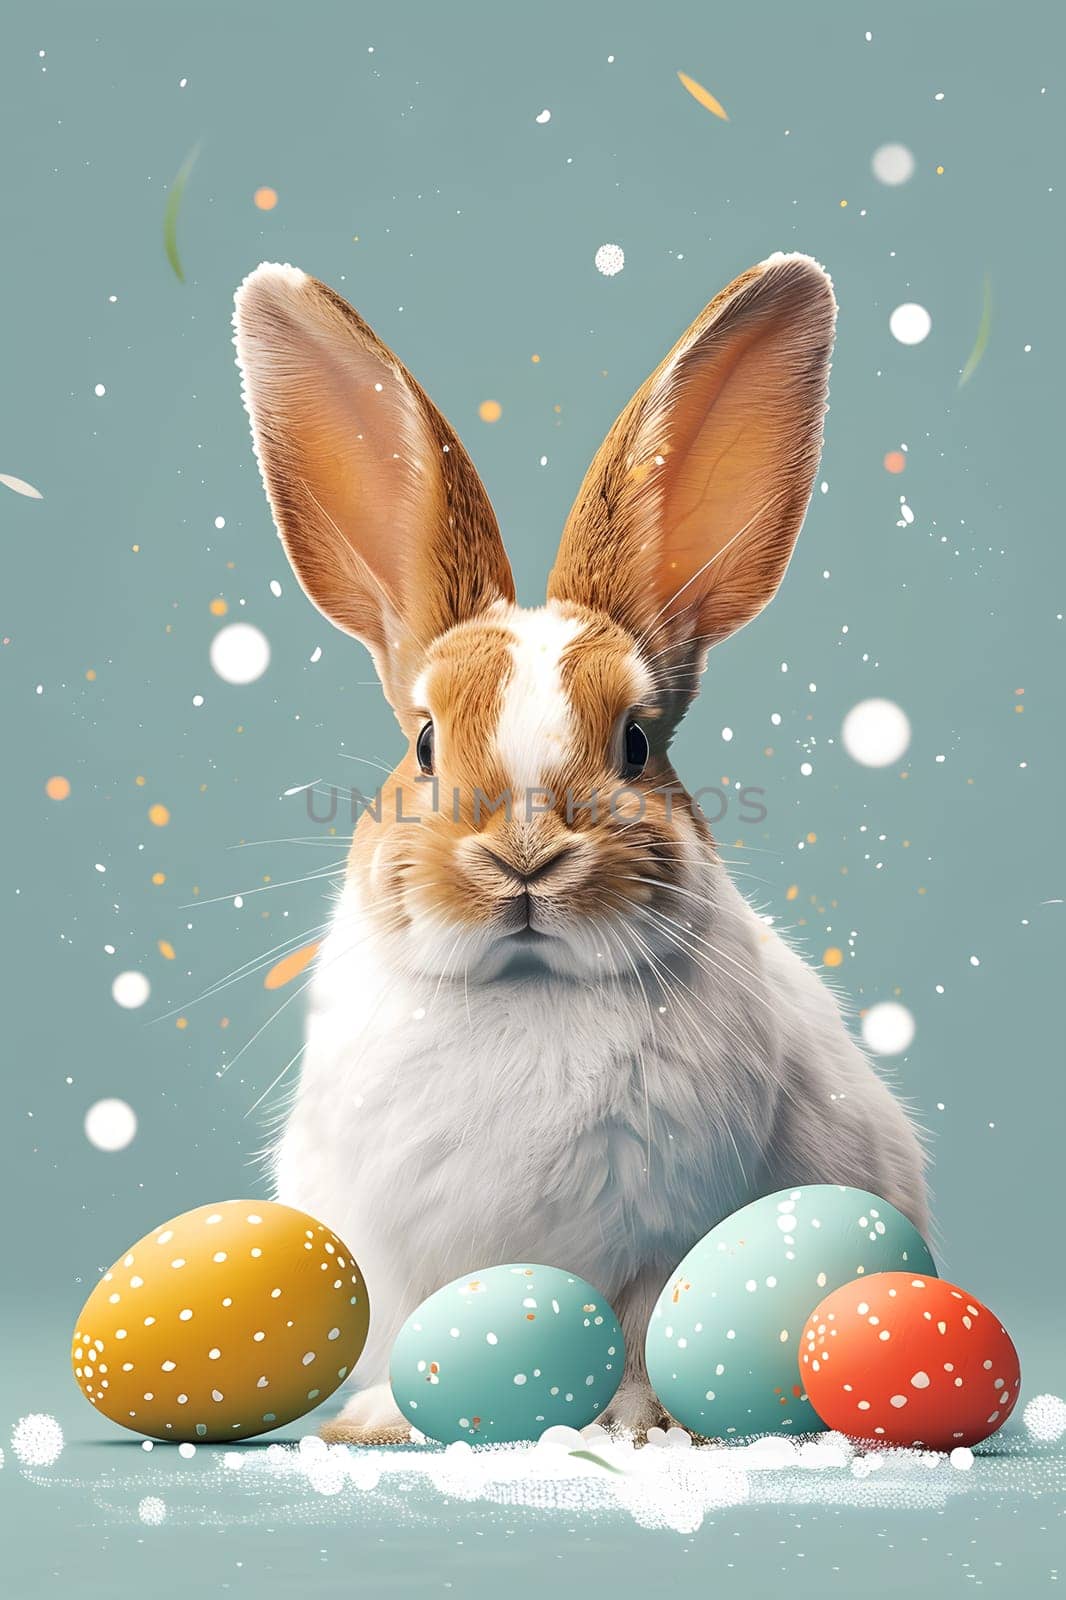 A domestic brown and white rabbit, with whiskers and long ears, is surrounded by colorful Easter eggs in a still life photography capturing the festive event